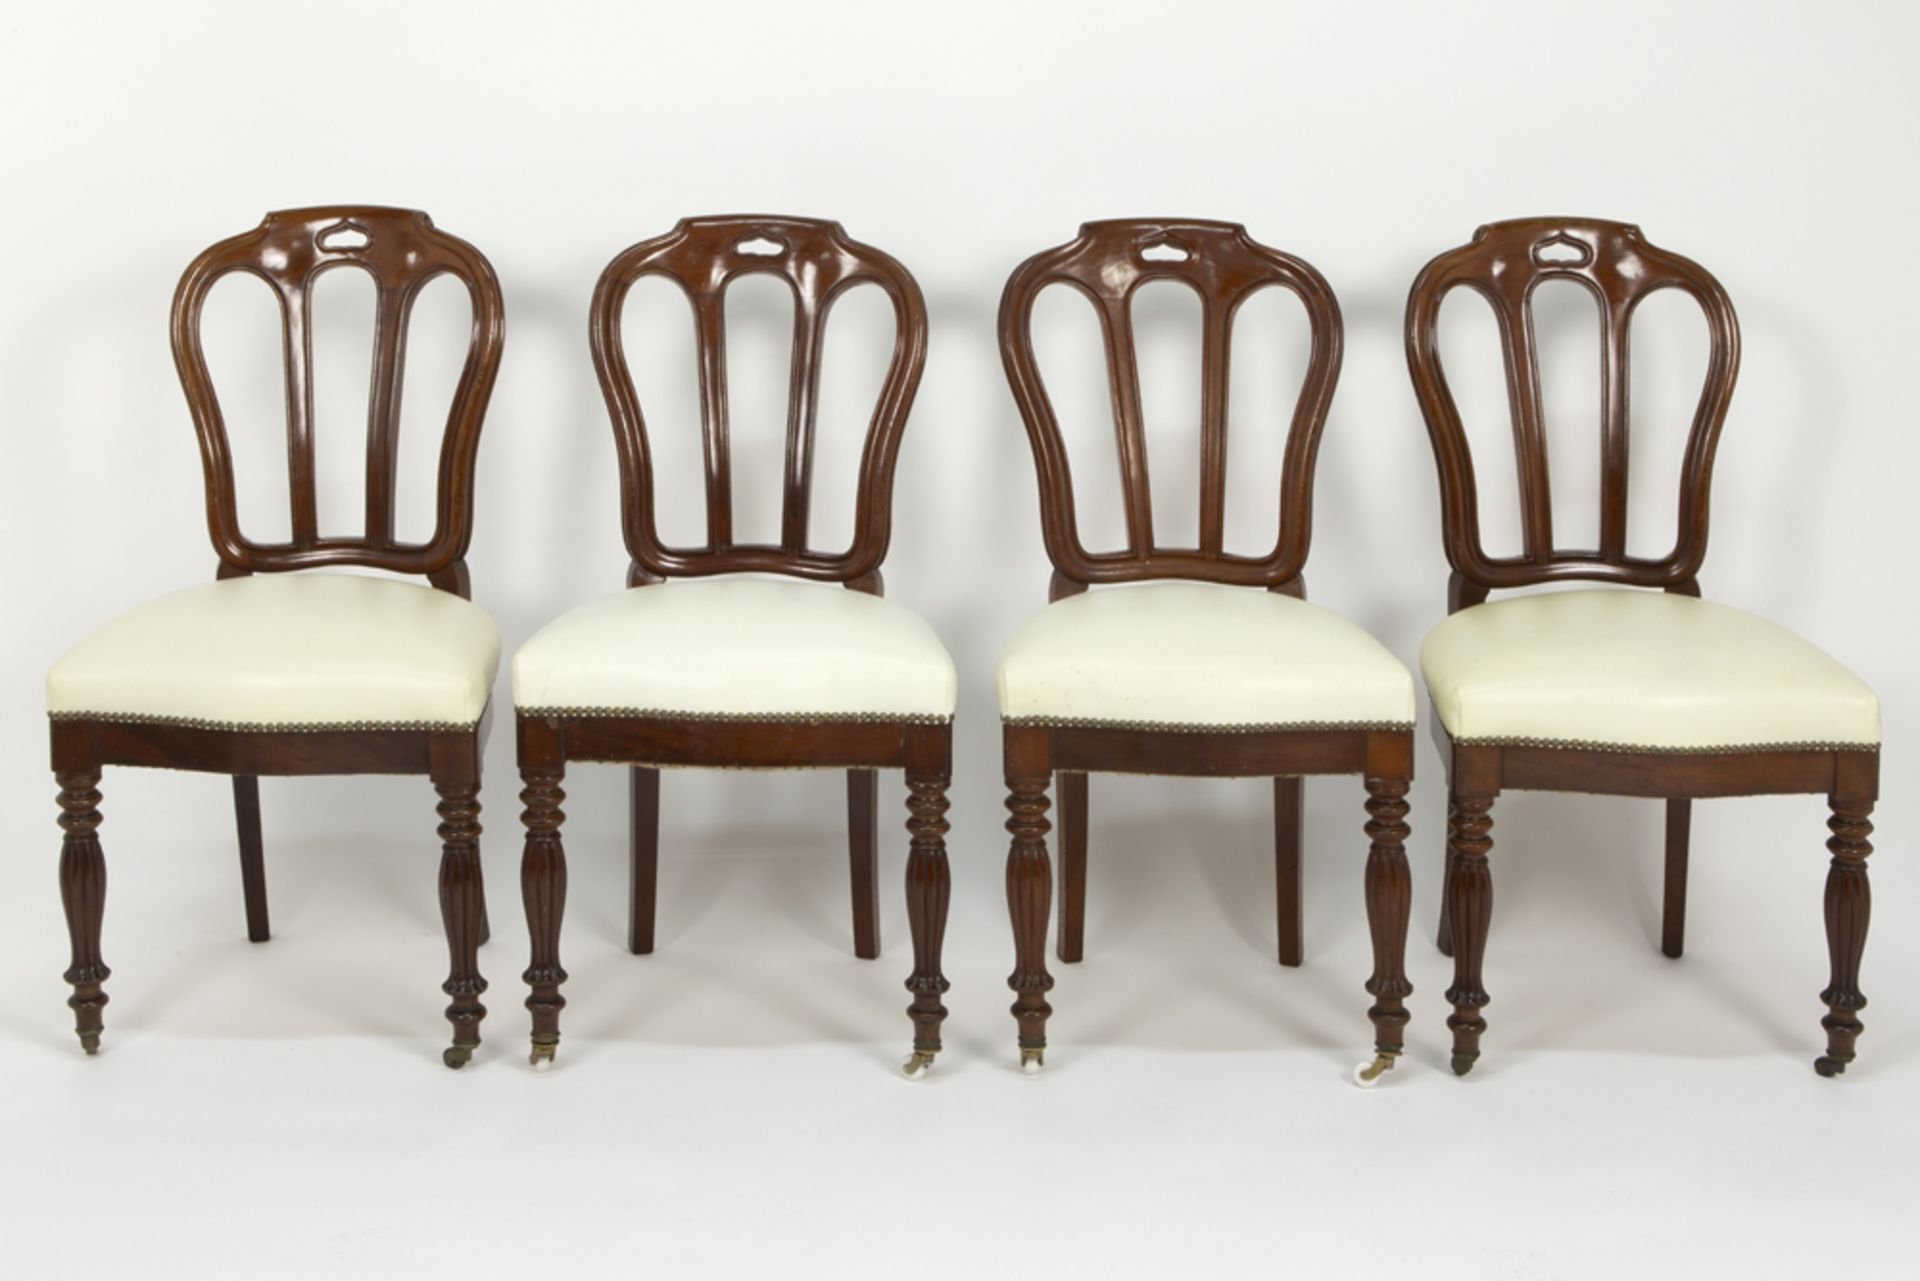 rare series of sixteen 19th Cent. chairs with an elegant design in mahogany - all completely - Image 3 of 6